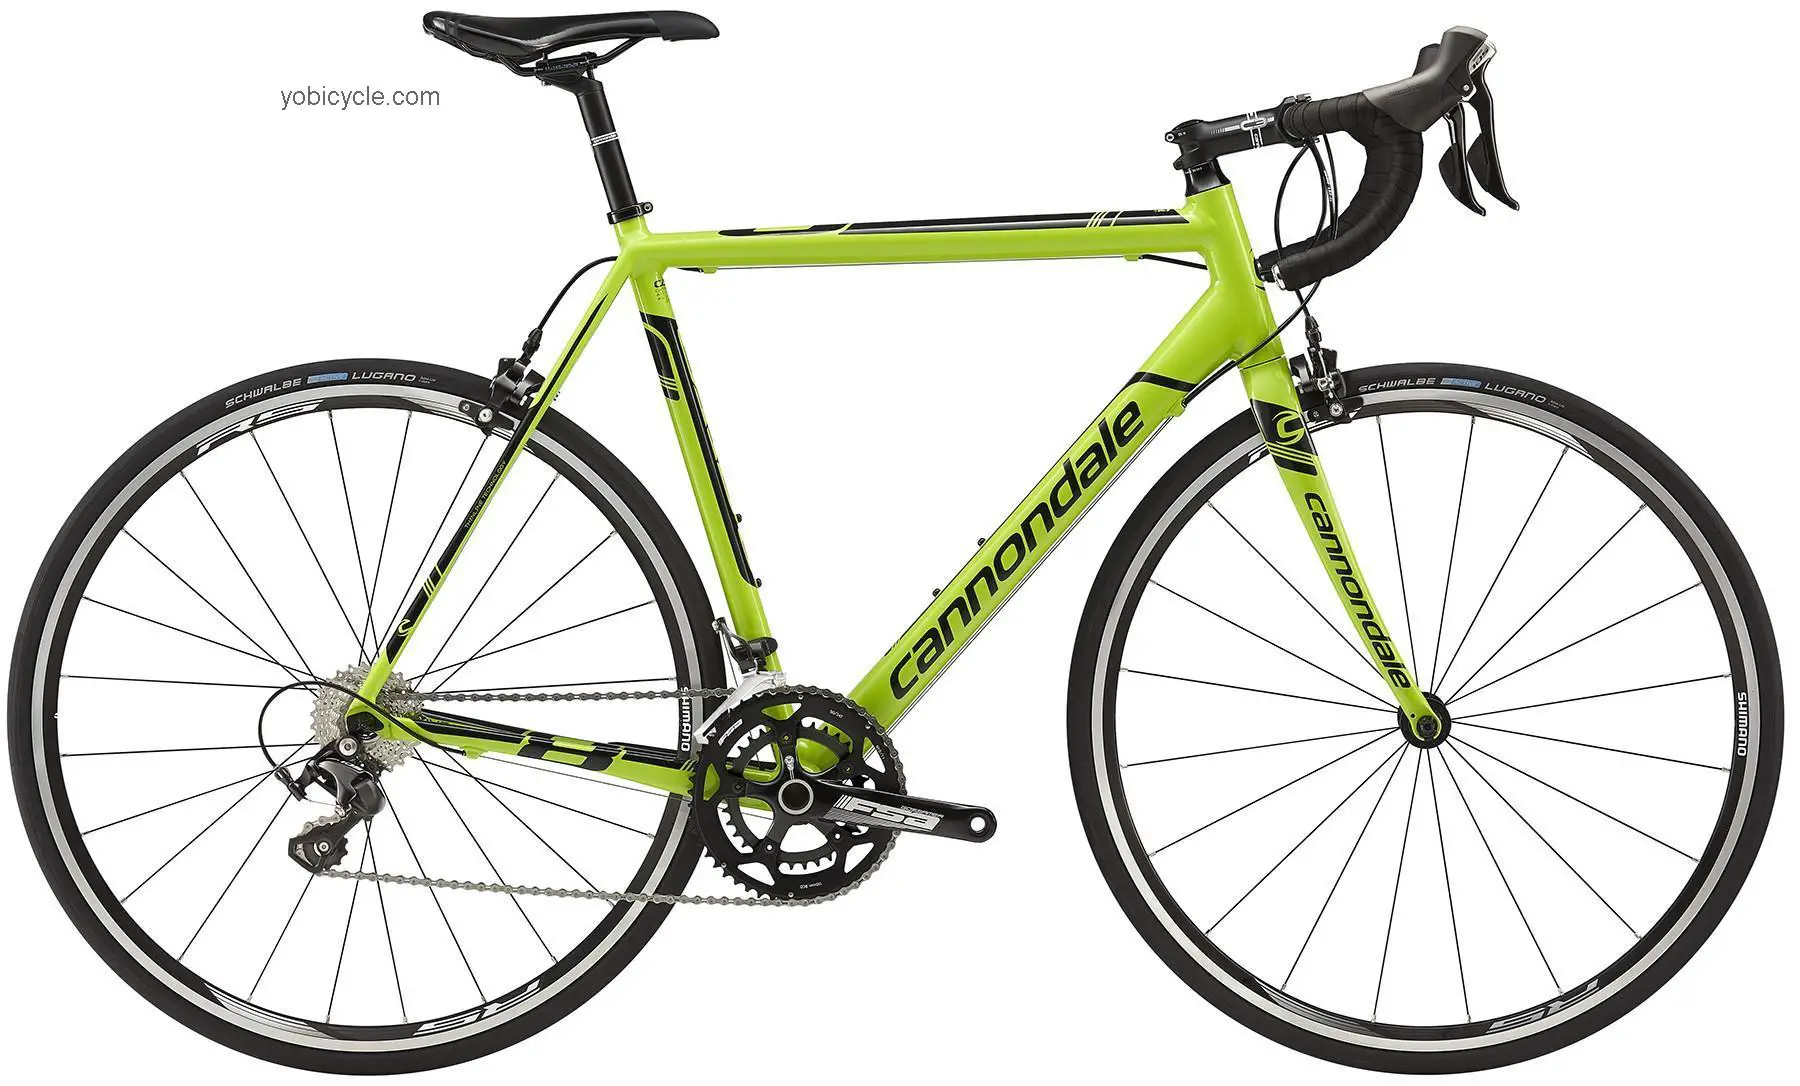 Cannondale CAAD8 105 5 2015 comparison online with competitors